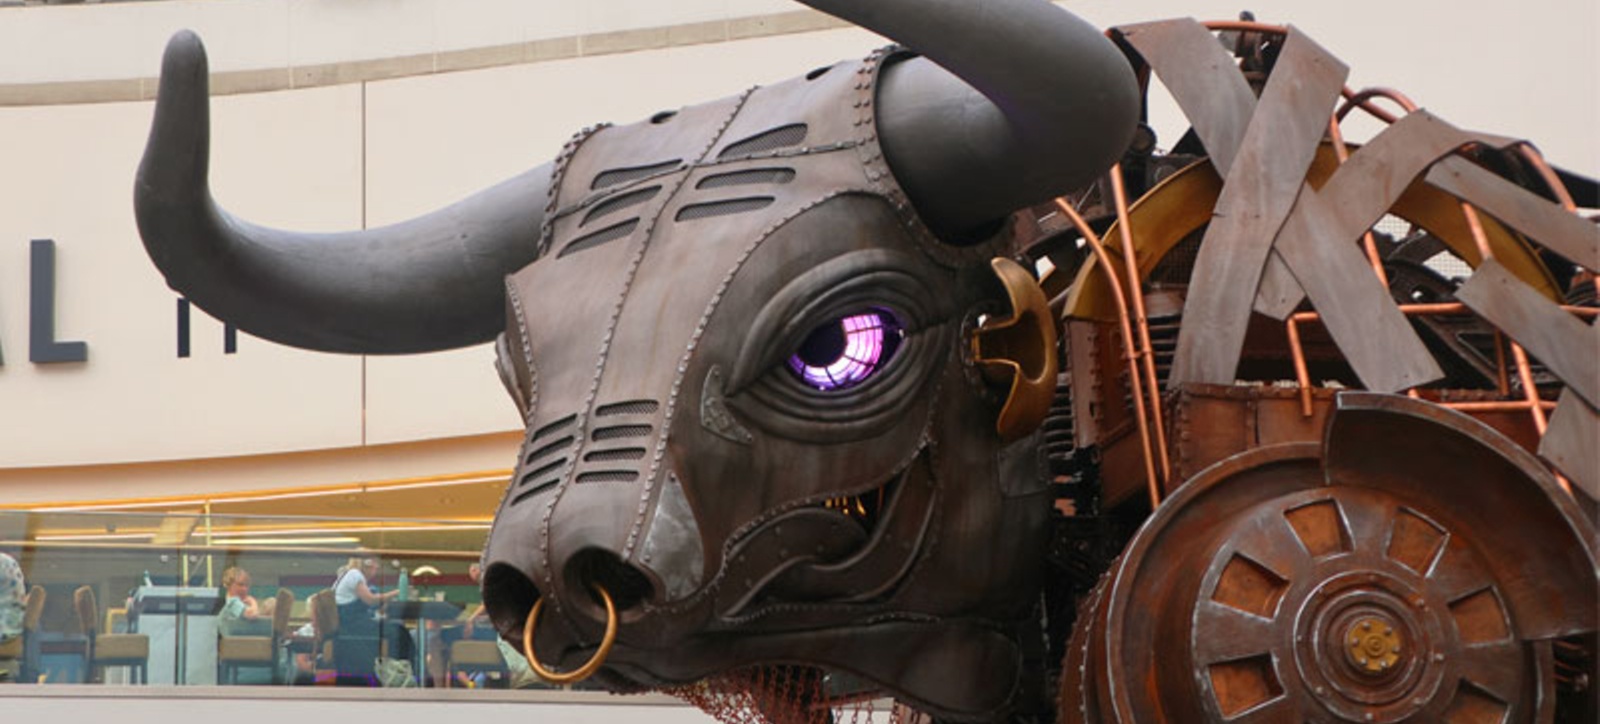 Ozzy the steampunk mechanical bull, which had a starring role in the opening ceremony at the 2022 Commonwealth Games in Birmingham